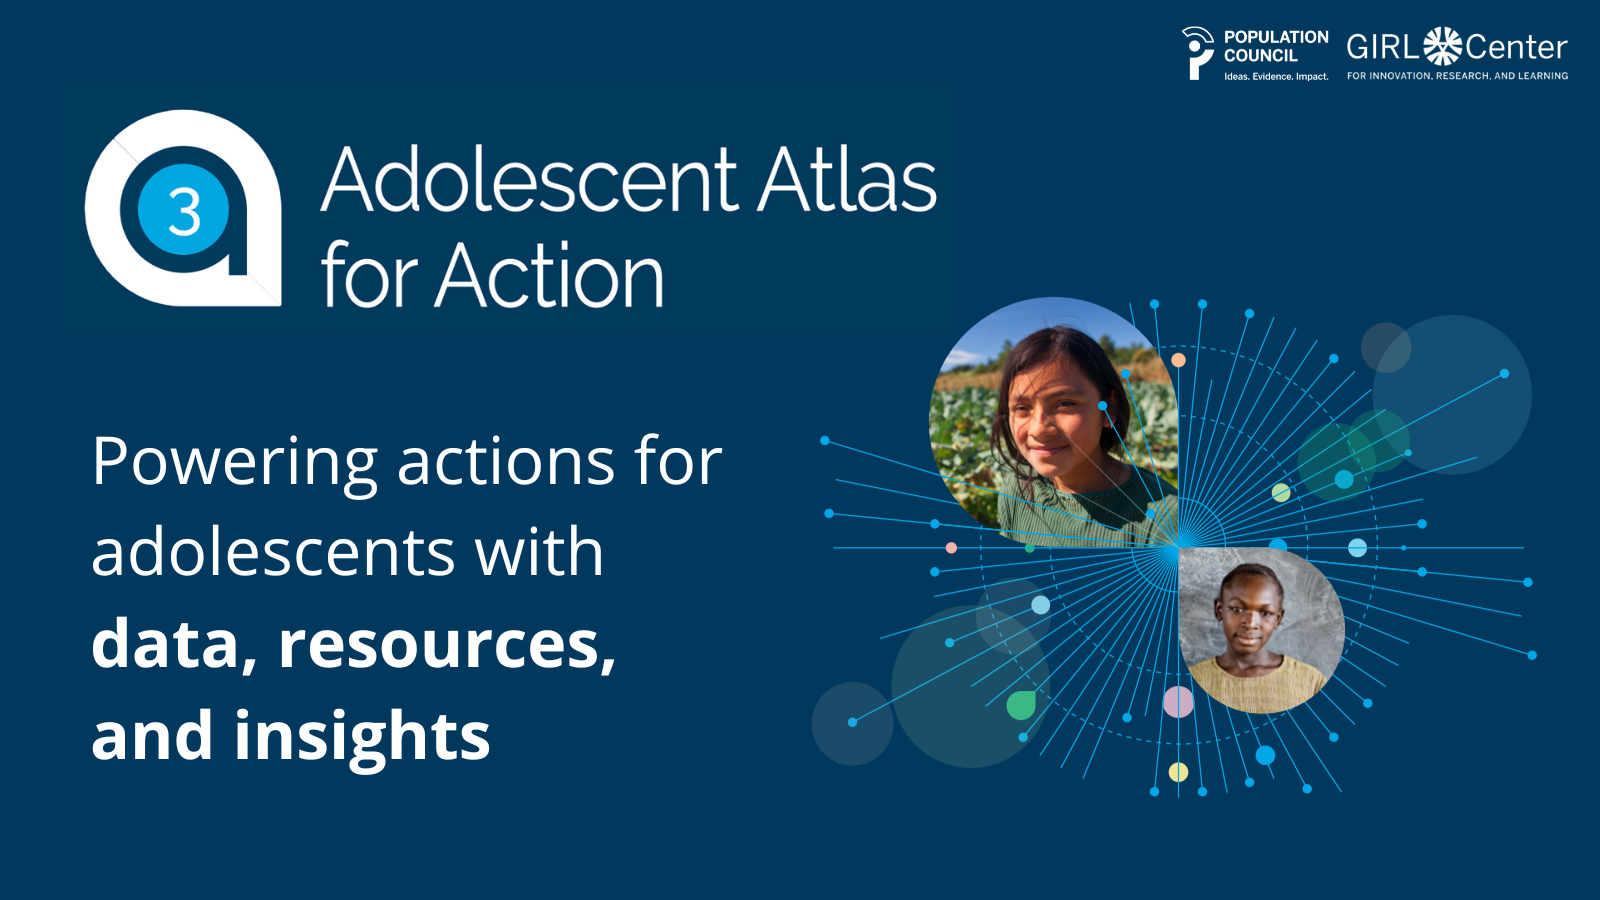 Adolescent Atlas for Action screenshot and logo Ideas. Evidence. Impact.